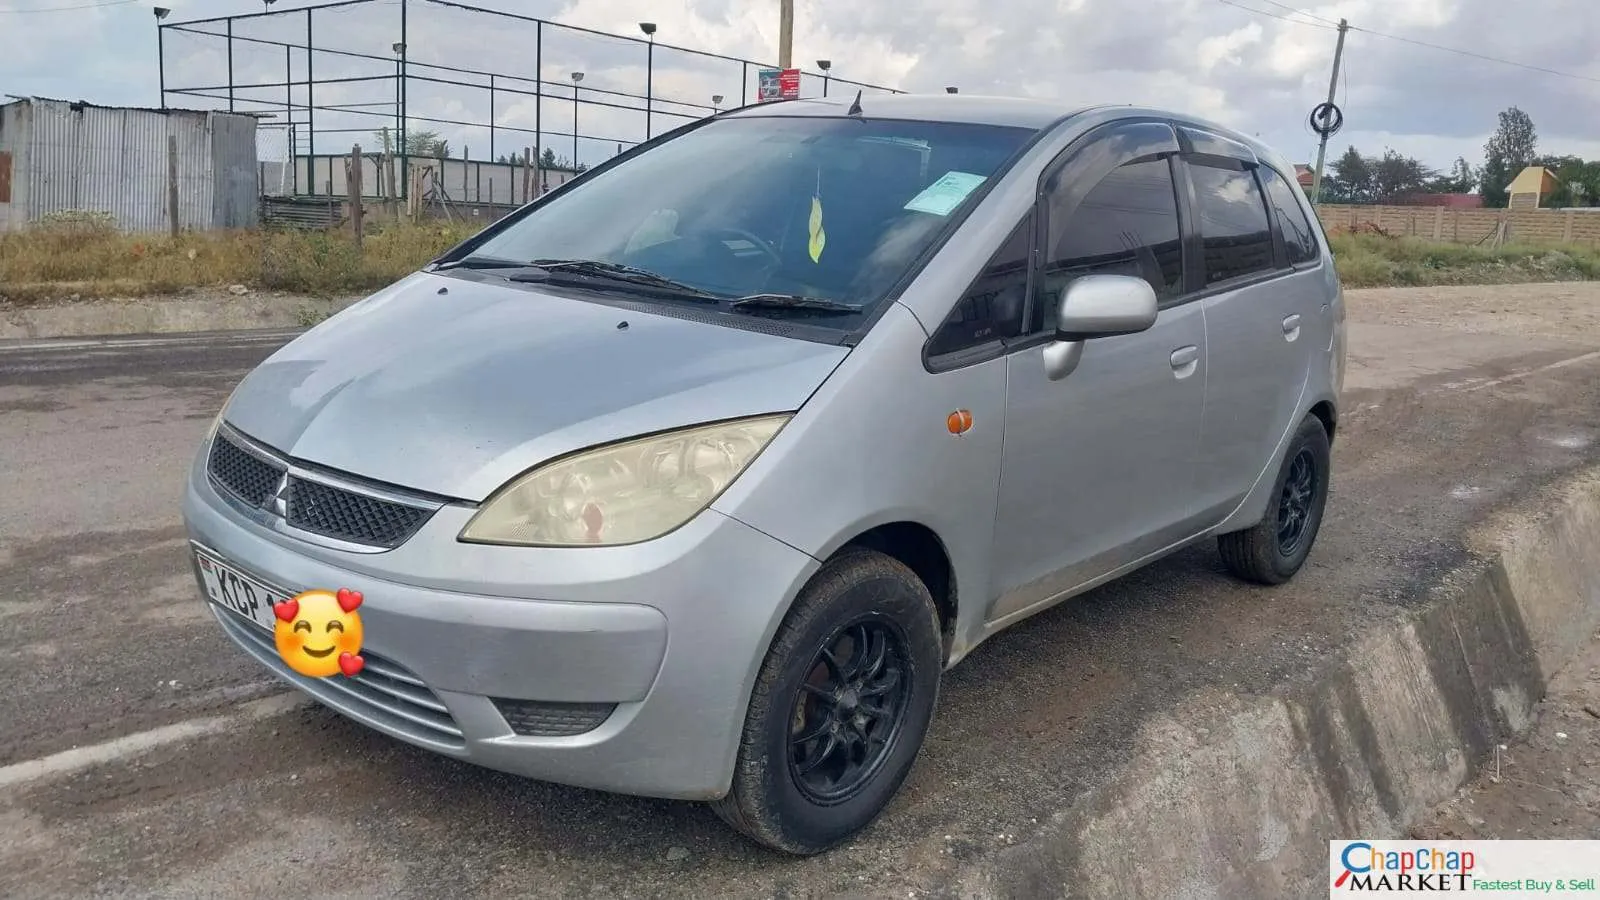 Mitsubishi Colt Plus kenya You Pay 30% Pay Deposit Trade in Ok Mitsubishi colt plus for sale in kenya hire purchase installments EXCLUSIVE 🔥